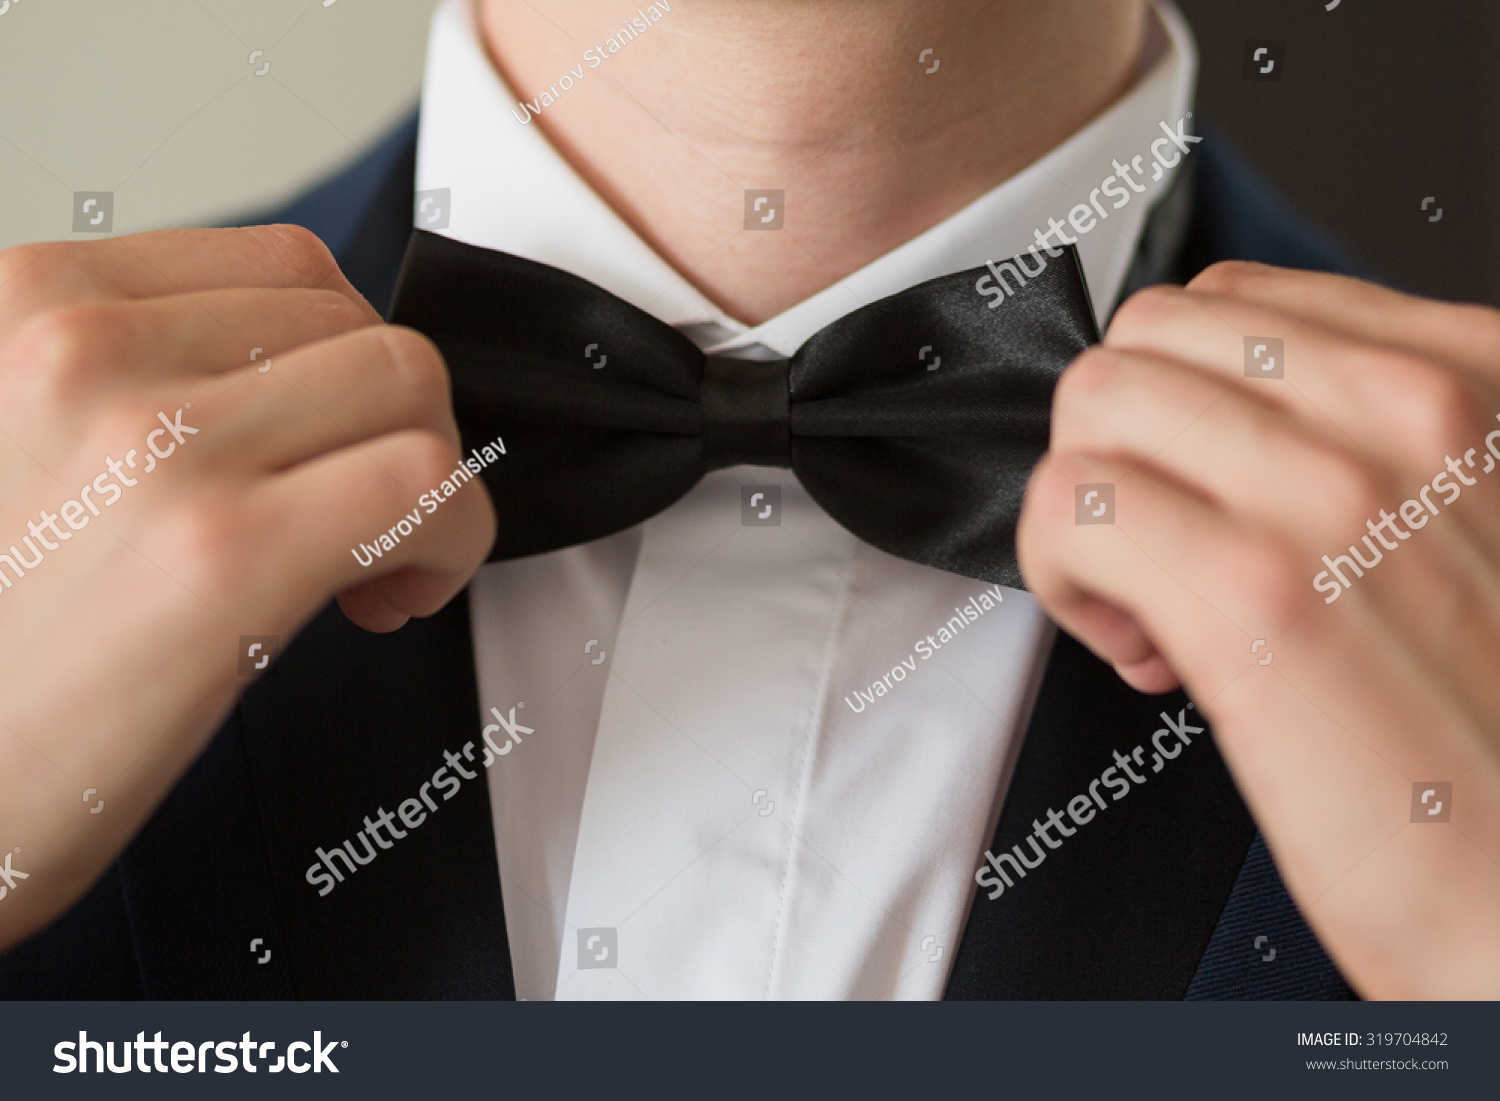 Man's hands touches bow-tie on a suit #319704842